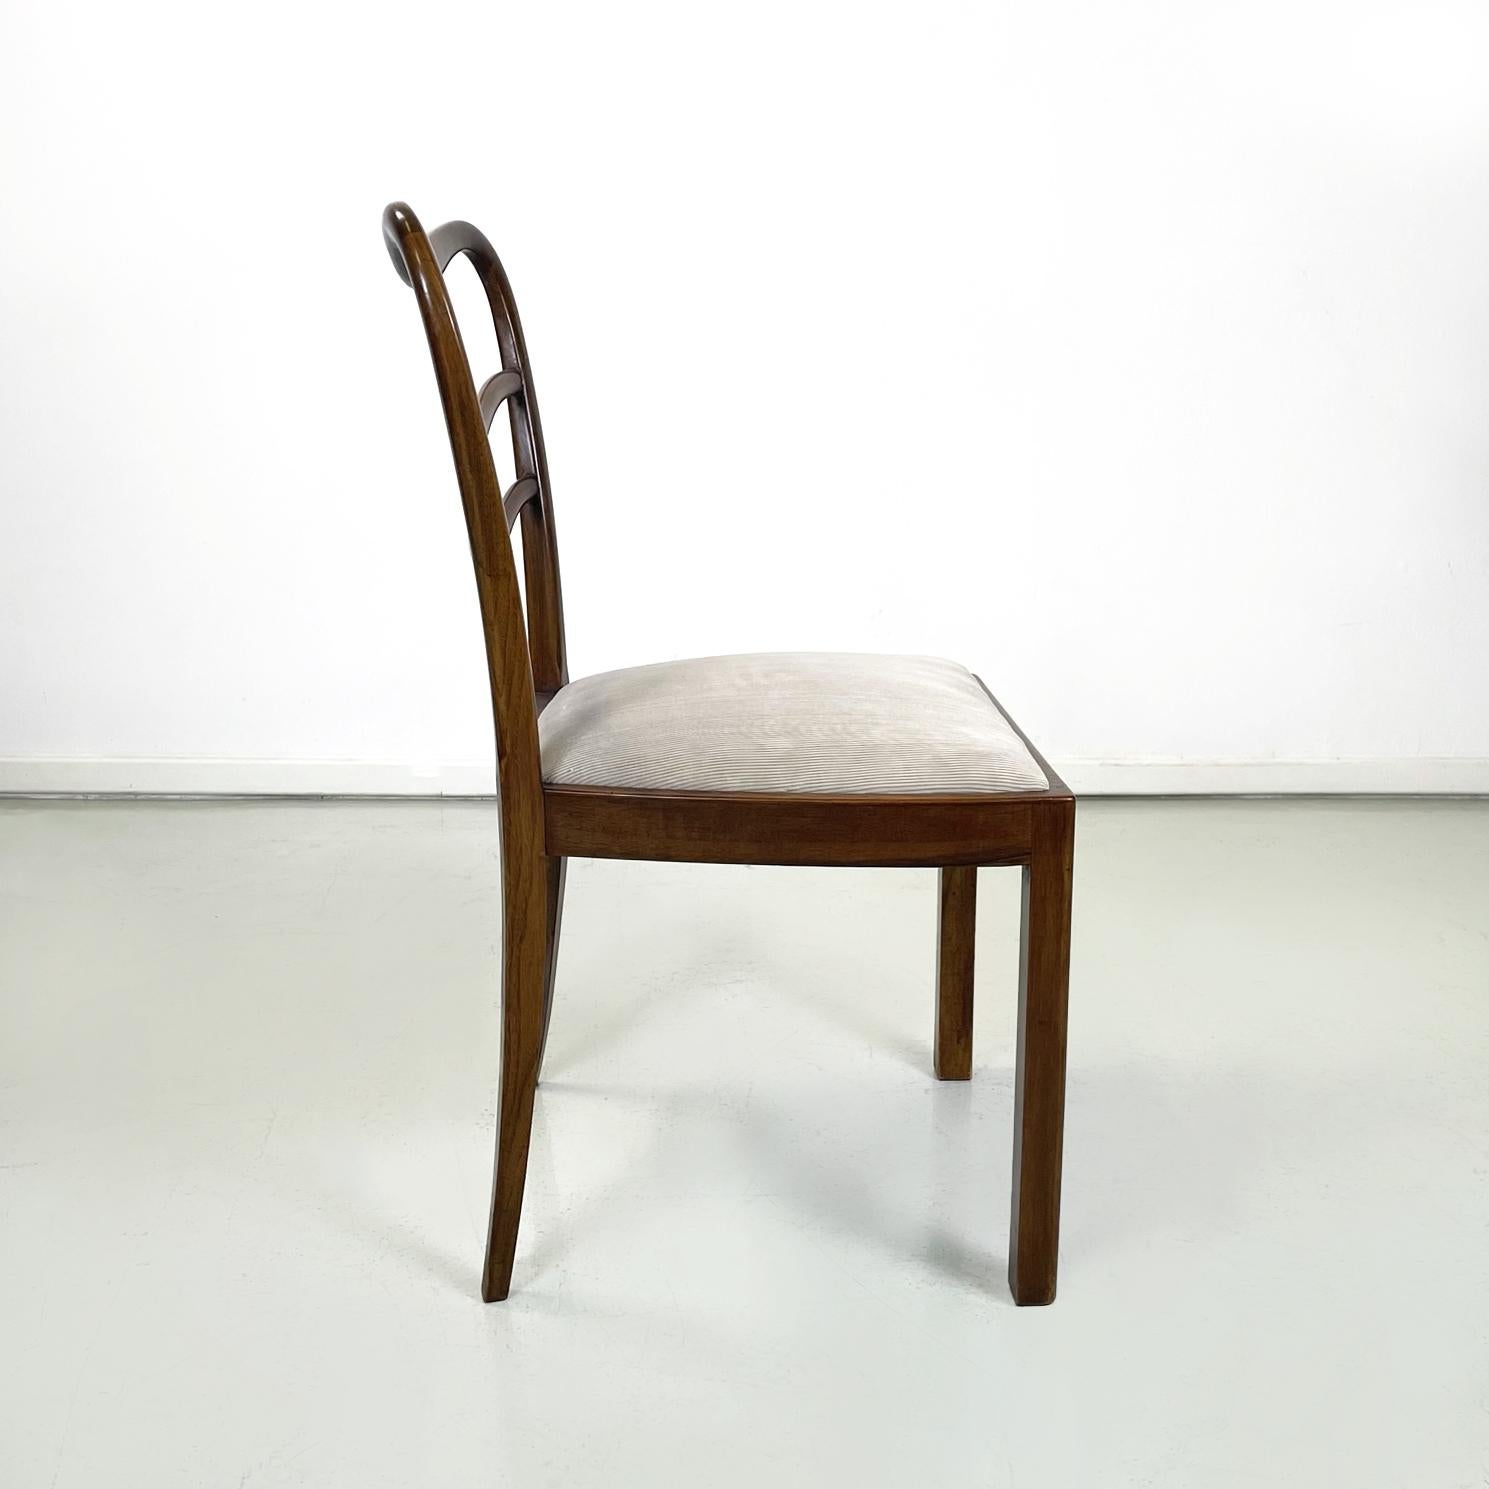 Hungarian Hungary Art Deco Chairs in wood and beige corduroy velvet, 1930s For Sale